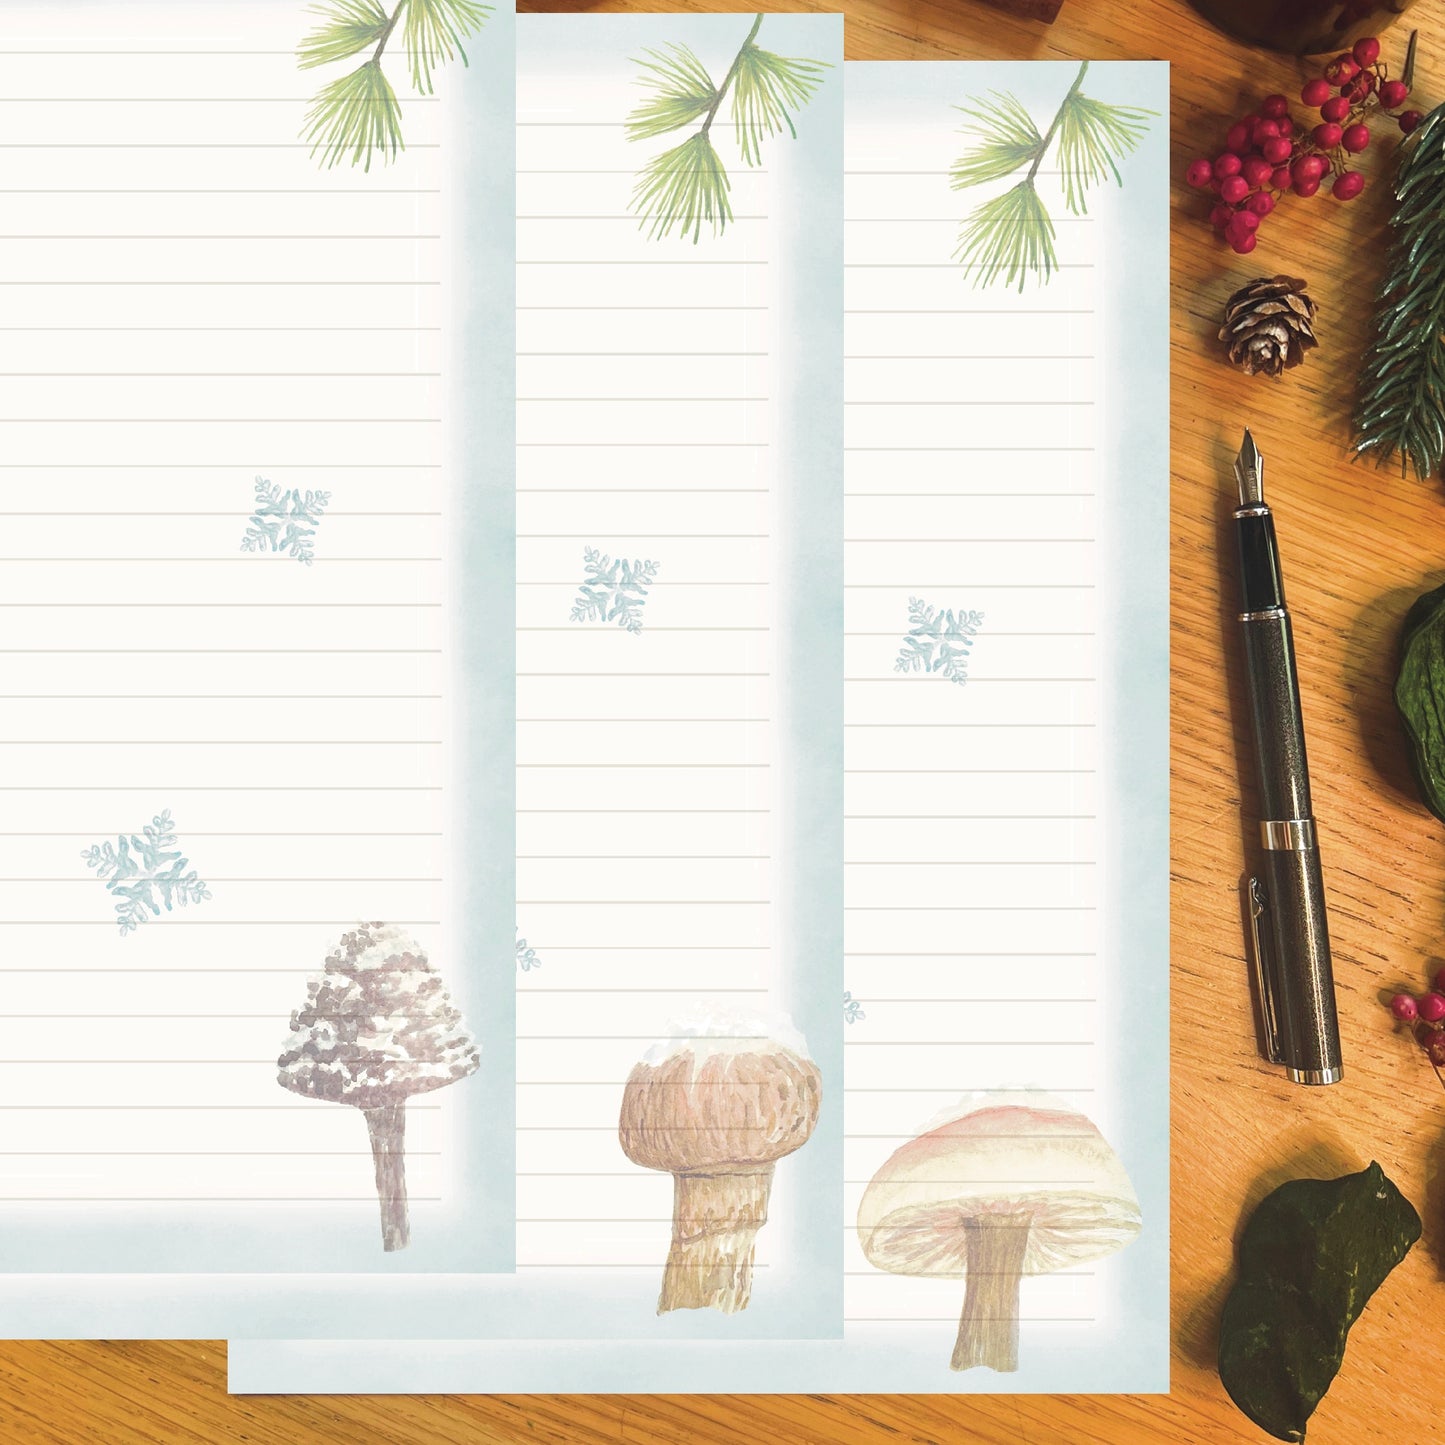 3 Winter wanderland illustrated papers featuring a snow topped mushroom with an ice blue border and snowflakes across the page, on a wooden desk